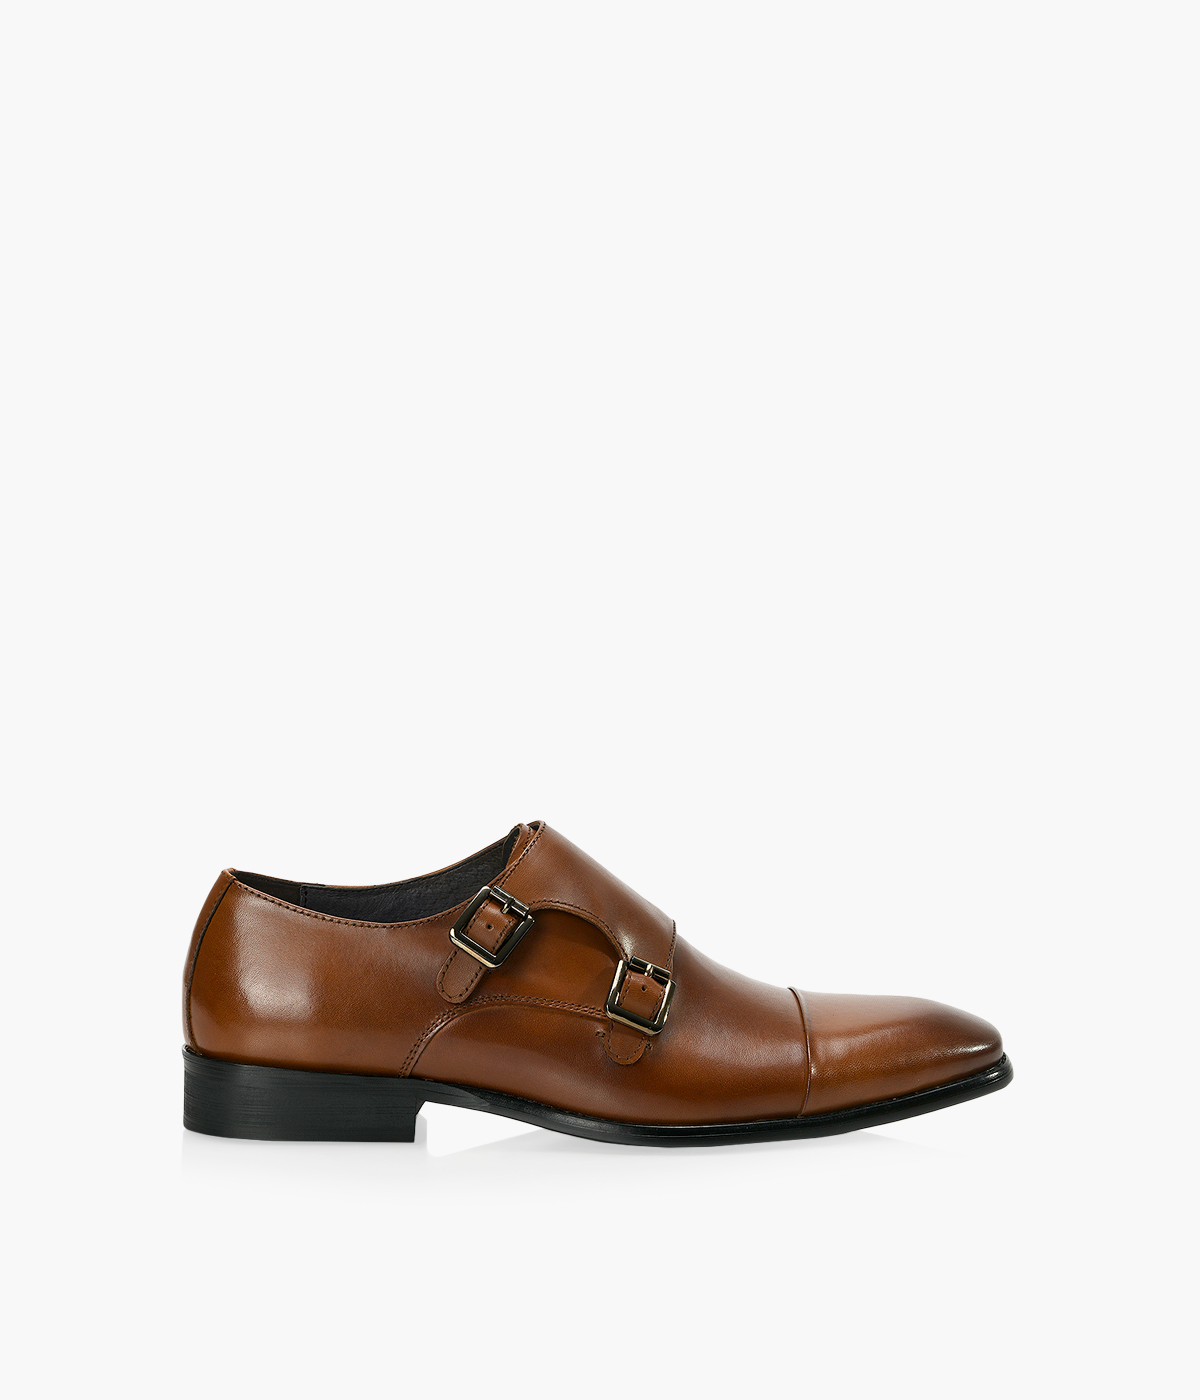 BROWNS ARGYLE - Leather | Browns Shoes